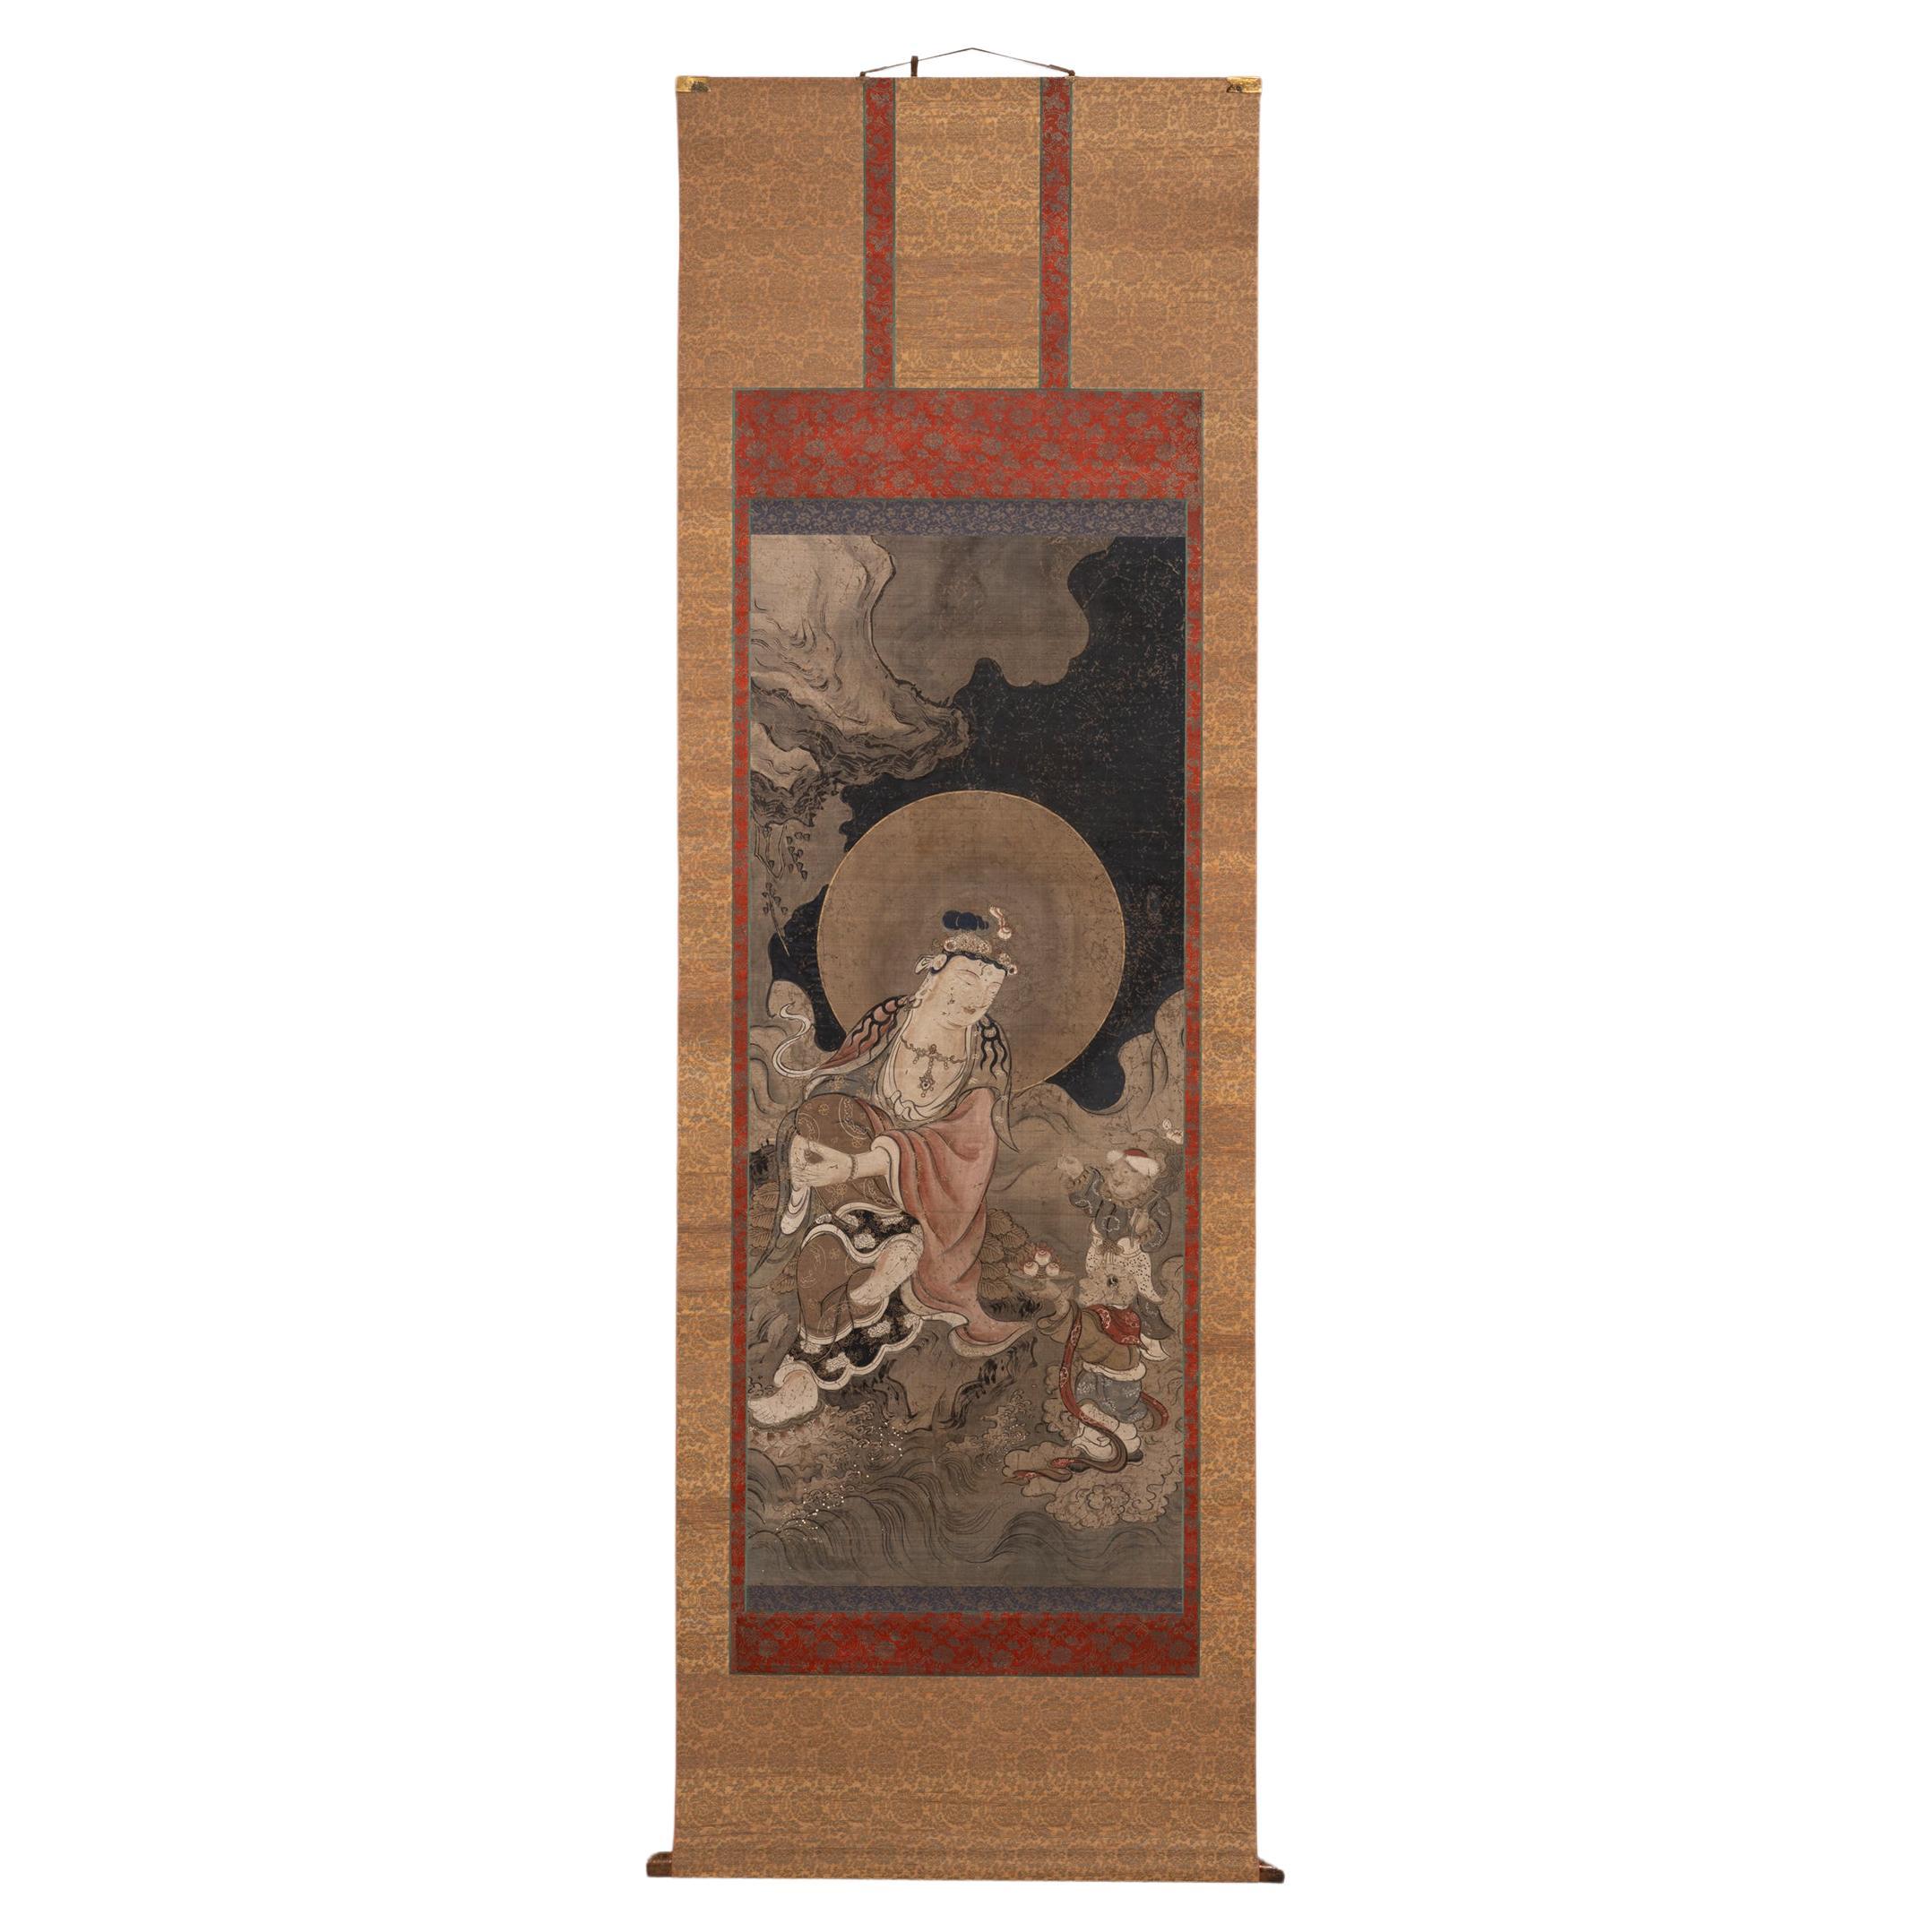 Japanese Hanging Scroll of the Goddess of Mercy, c. 1800